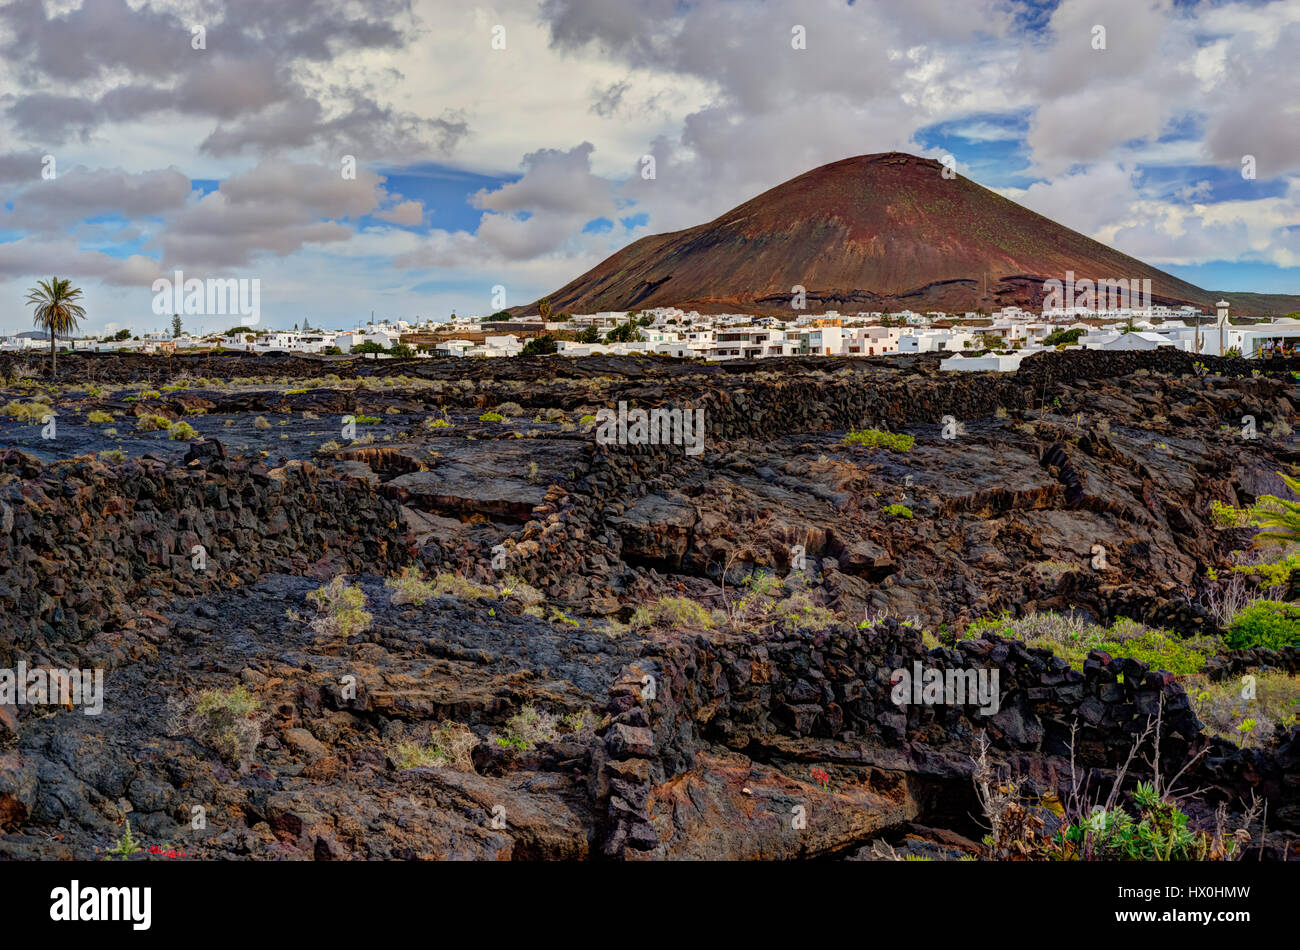 view on the typical Landscape and the La Woerden Volcano near Tahiche, Lanzarote, Spain Stock Photo